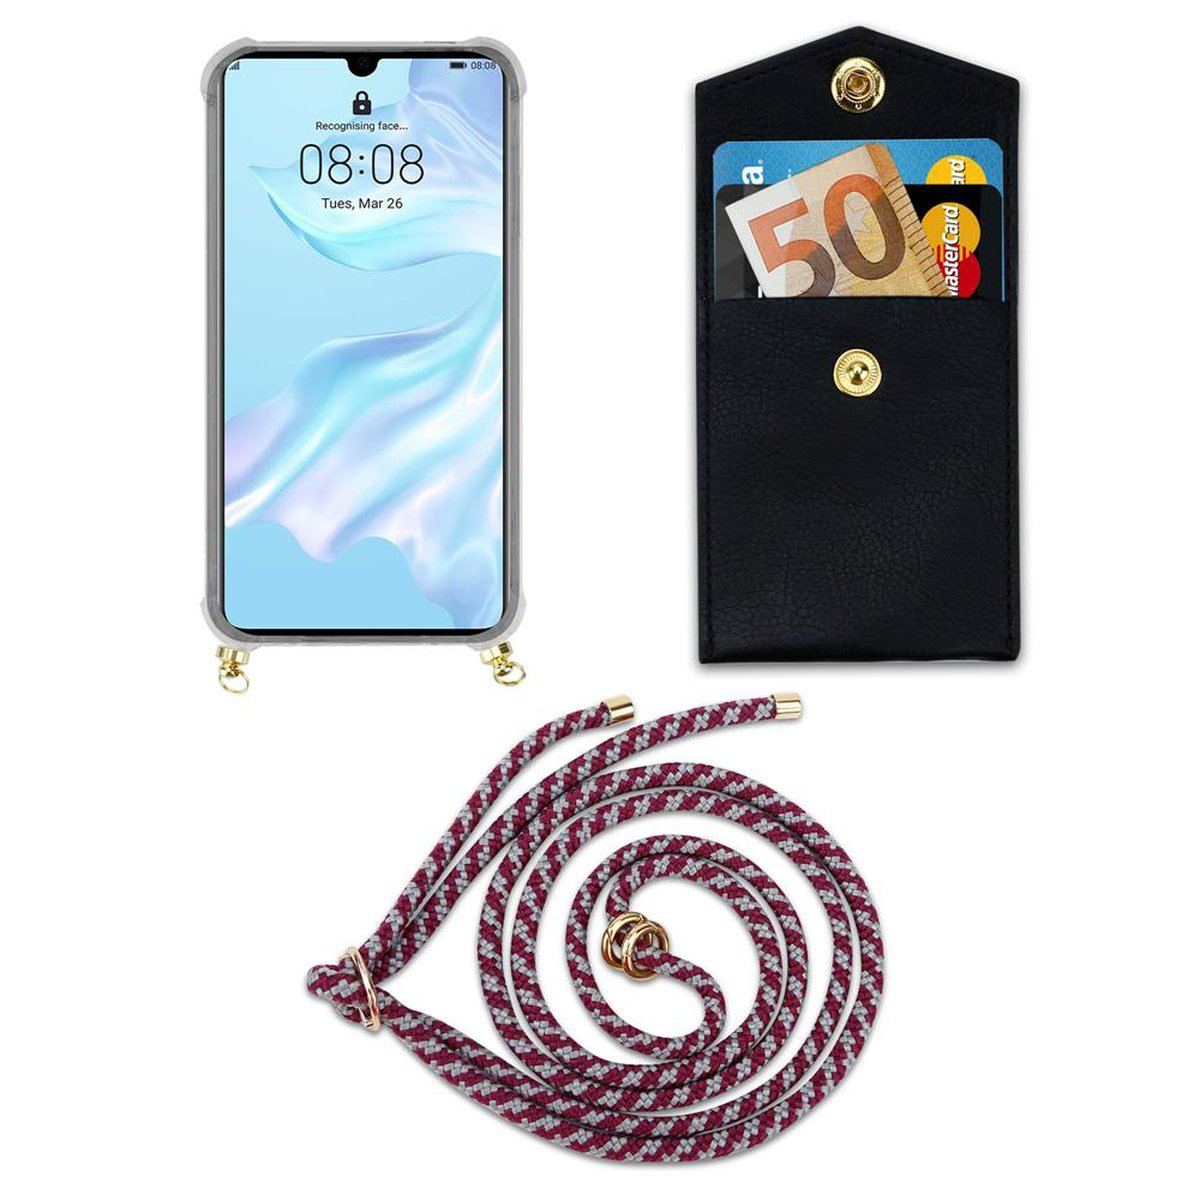 CADORABO Handy Kette mit Gold Huawei, Hülle, und Ringen, Kordel P30, abnehmbarer ROT Band WEIß Backcover